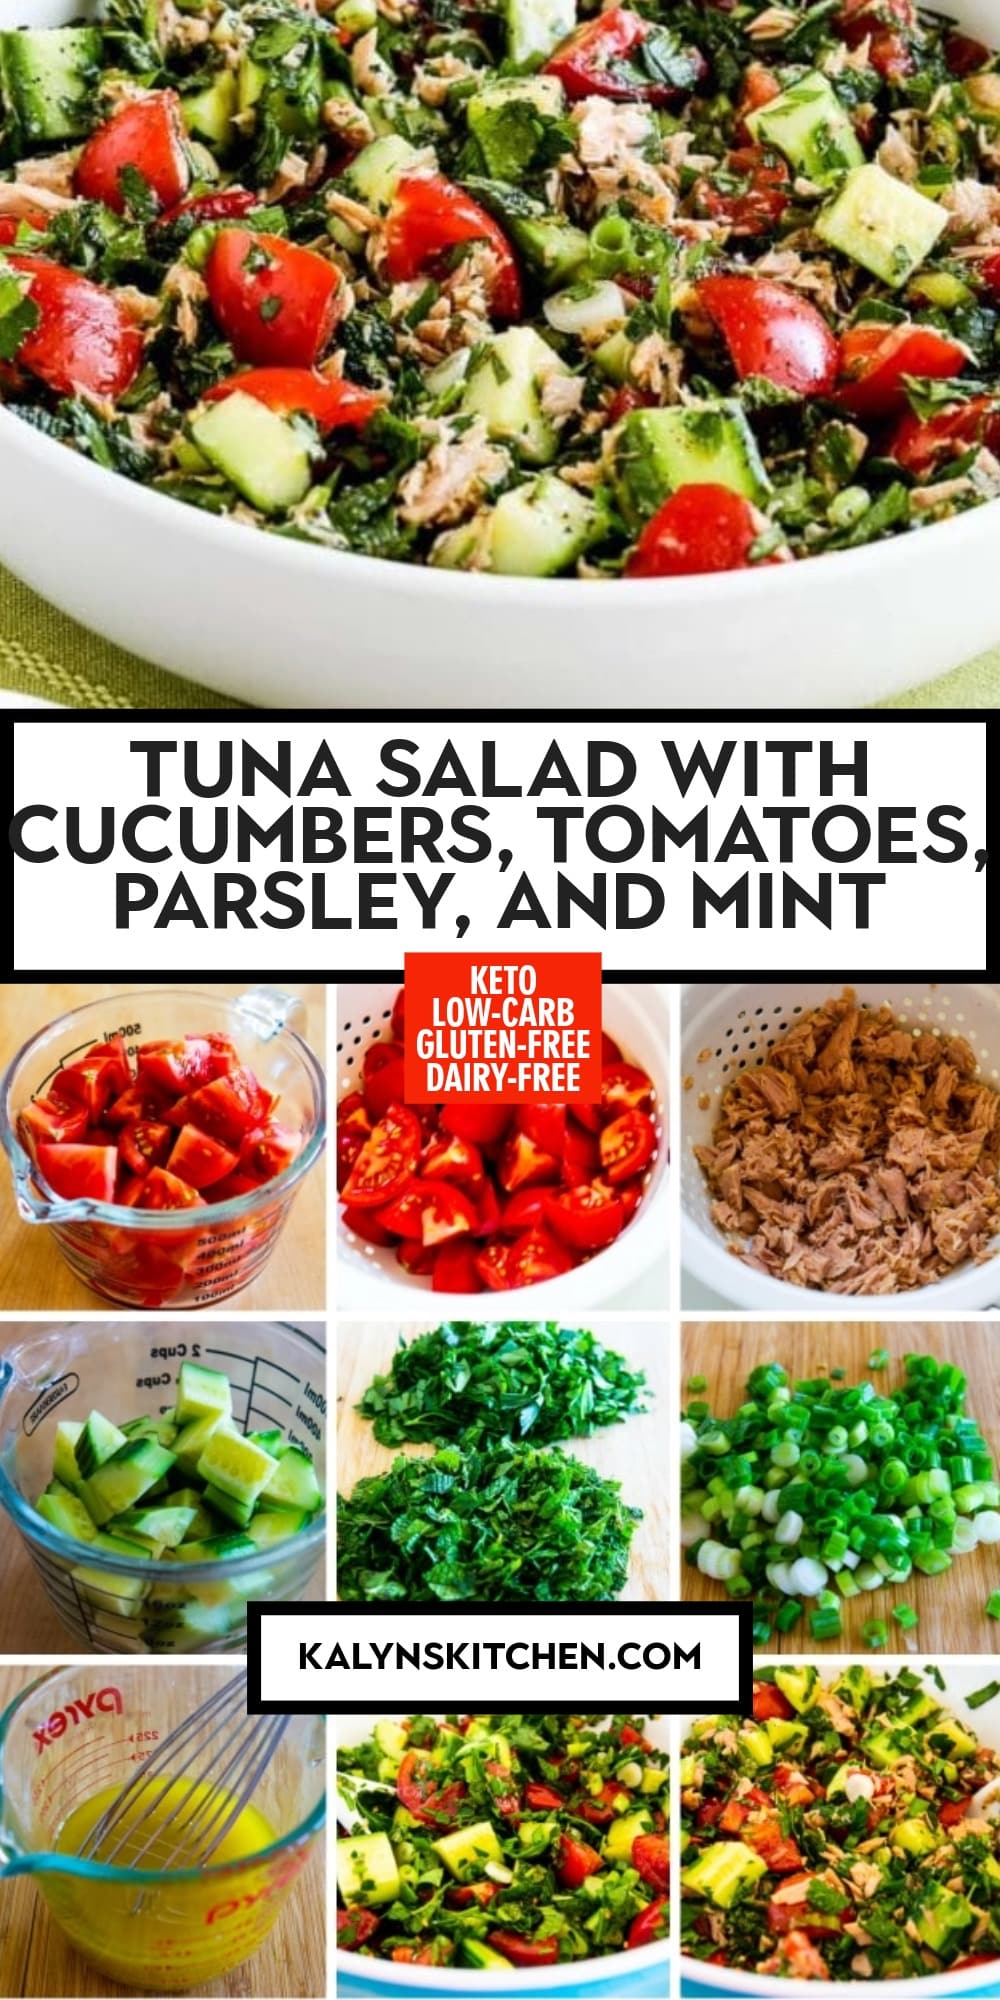 Pinterest image of Tuna Salad with Cucumbers, Tomatoes, Parsley, and Mint